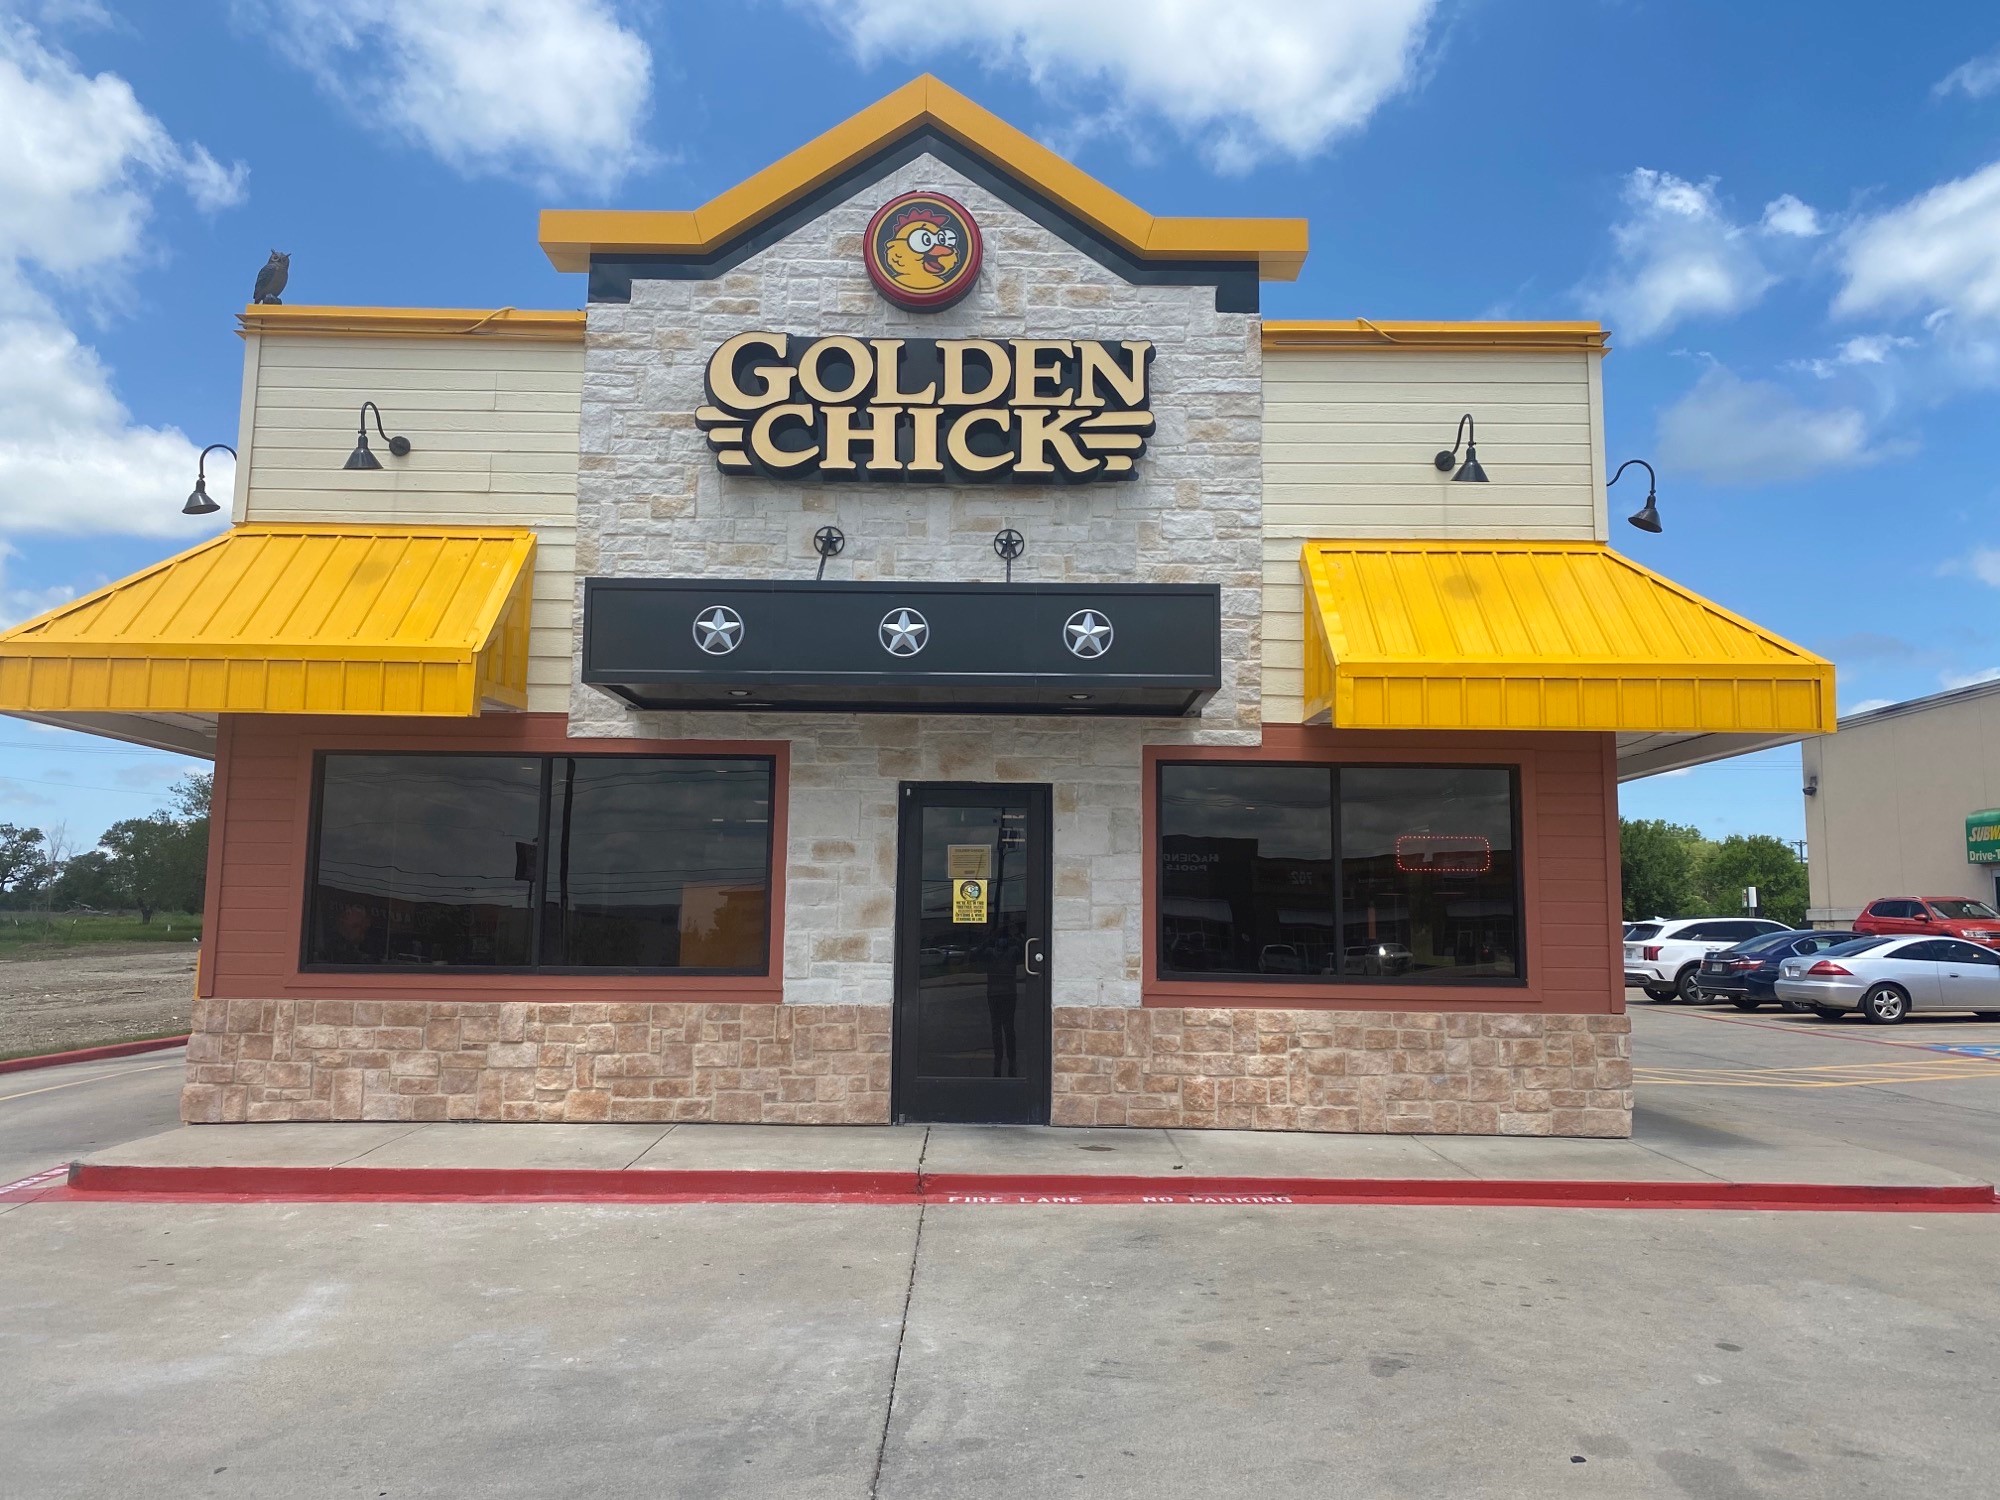 Golden Chick storefront.  Your local Golden Chick fast food restaurant in Hudson Oaks, Texas